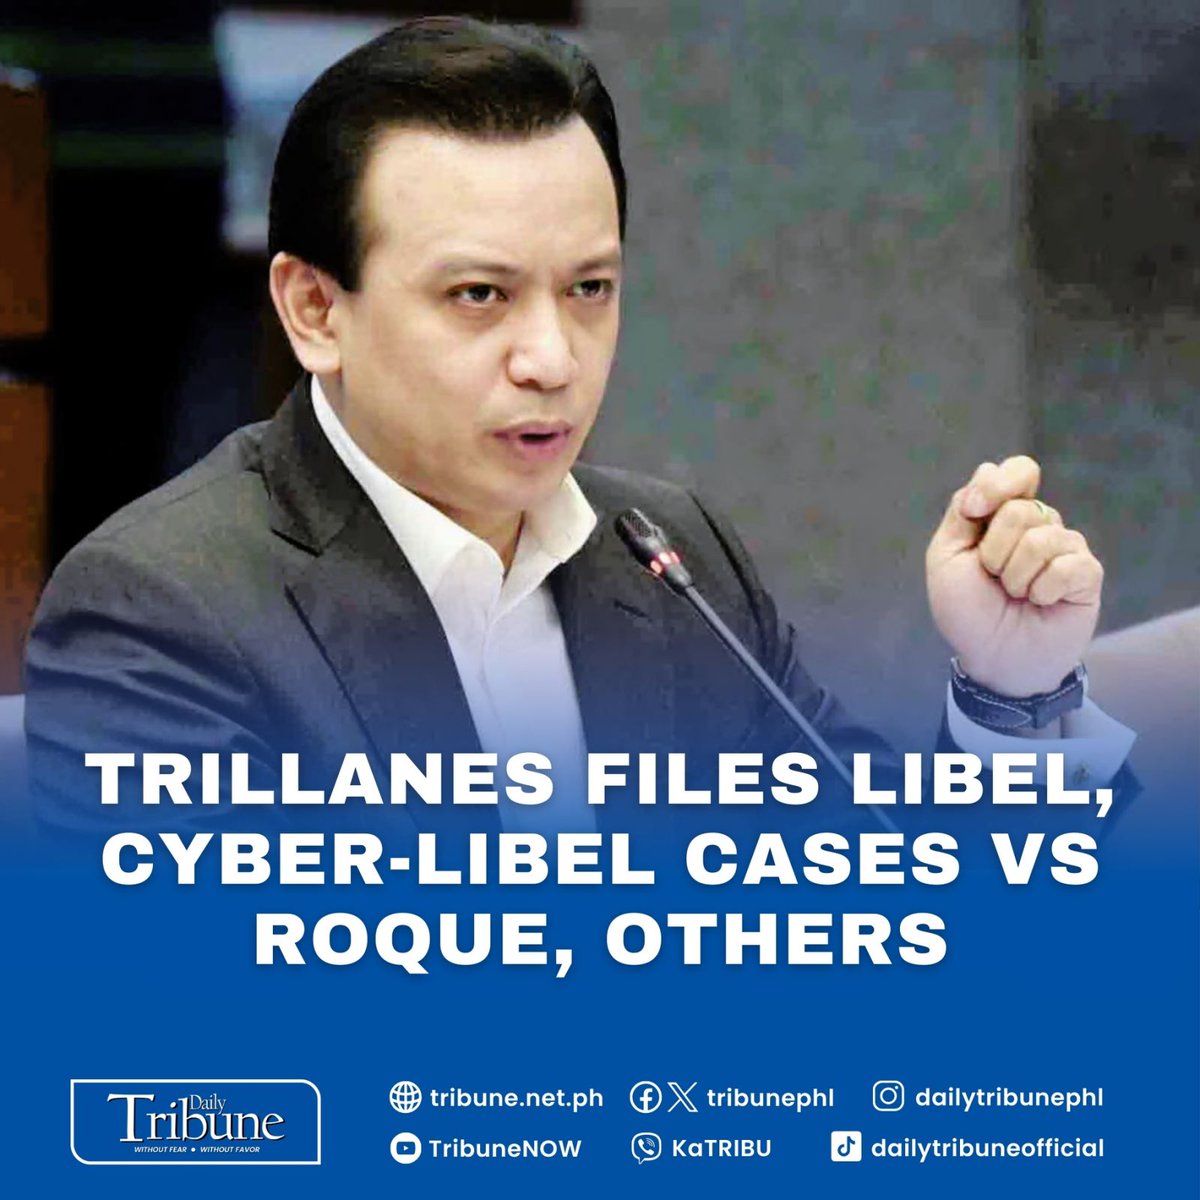 Former Senator Antonio Trillanes IV on Tuesday has filed several libel and cyber libel cases before the Quezon City Prosecutor's Office against pro-Duterte personalities and social media account holders, including former presidential mouthpiece Harry Roque, the media network…